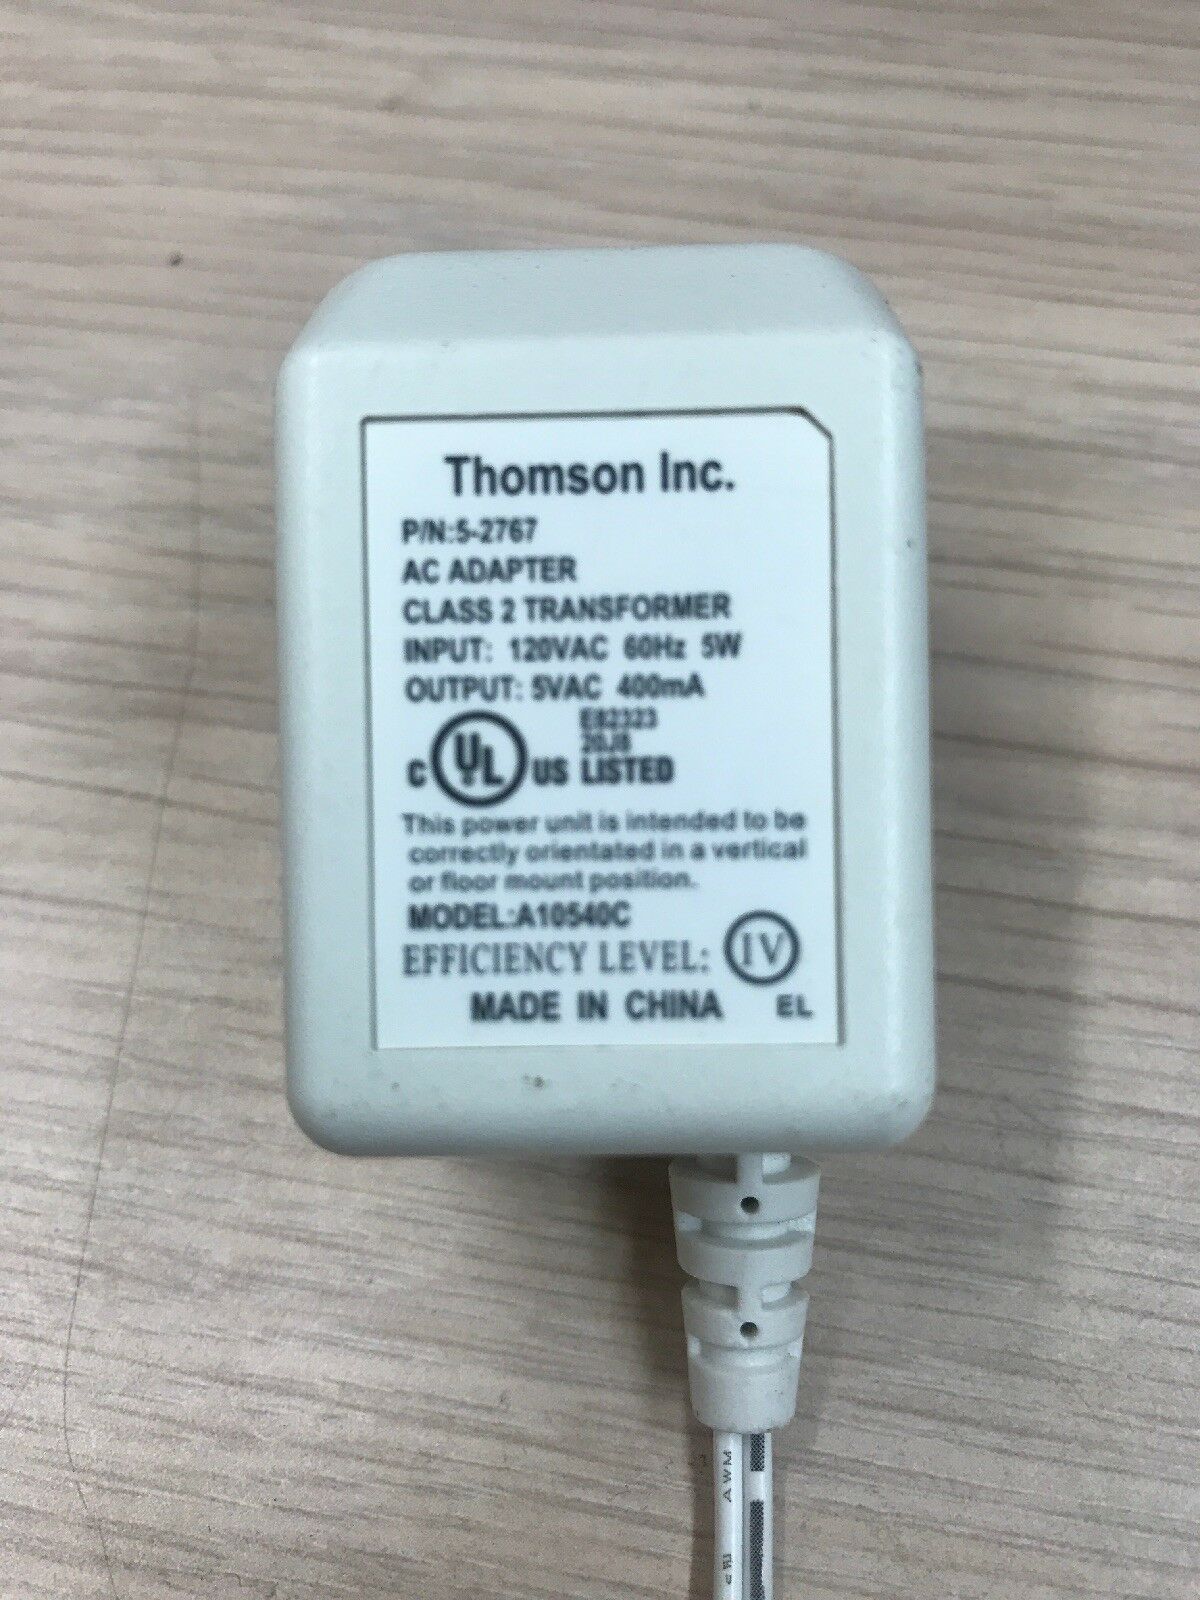 *Brand NEW*Thomson A10540C / 5-2767 Charger Power Supply 5V 400mA AC/AC Adapter